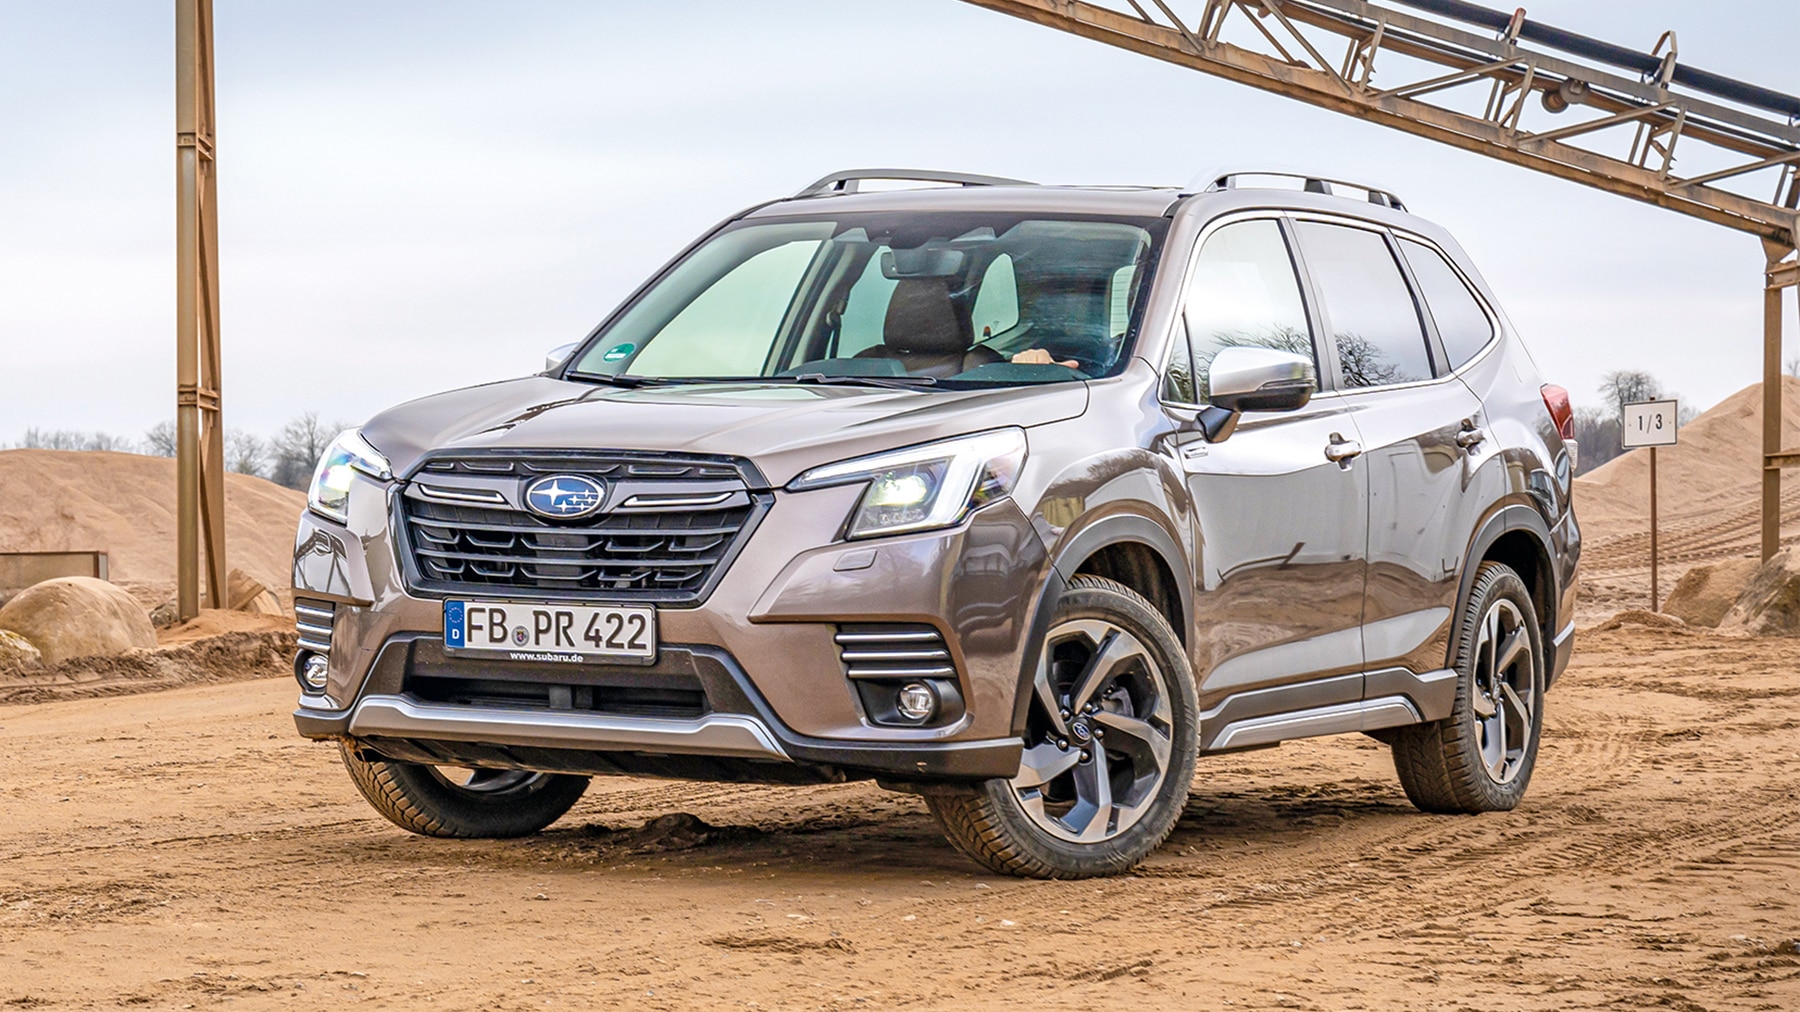 2022 And 2023 Subaru Forester Release Date